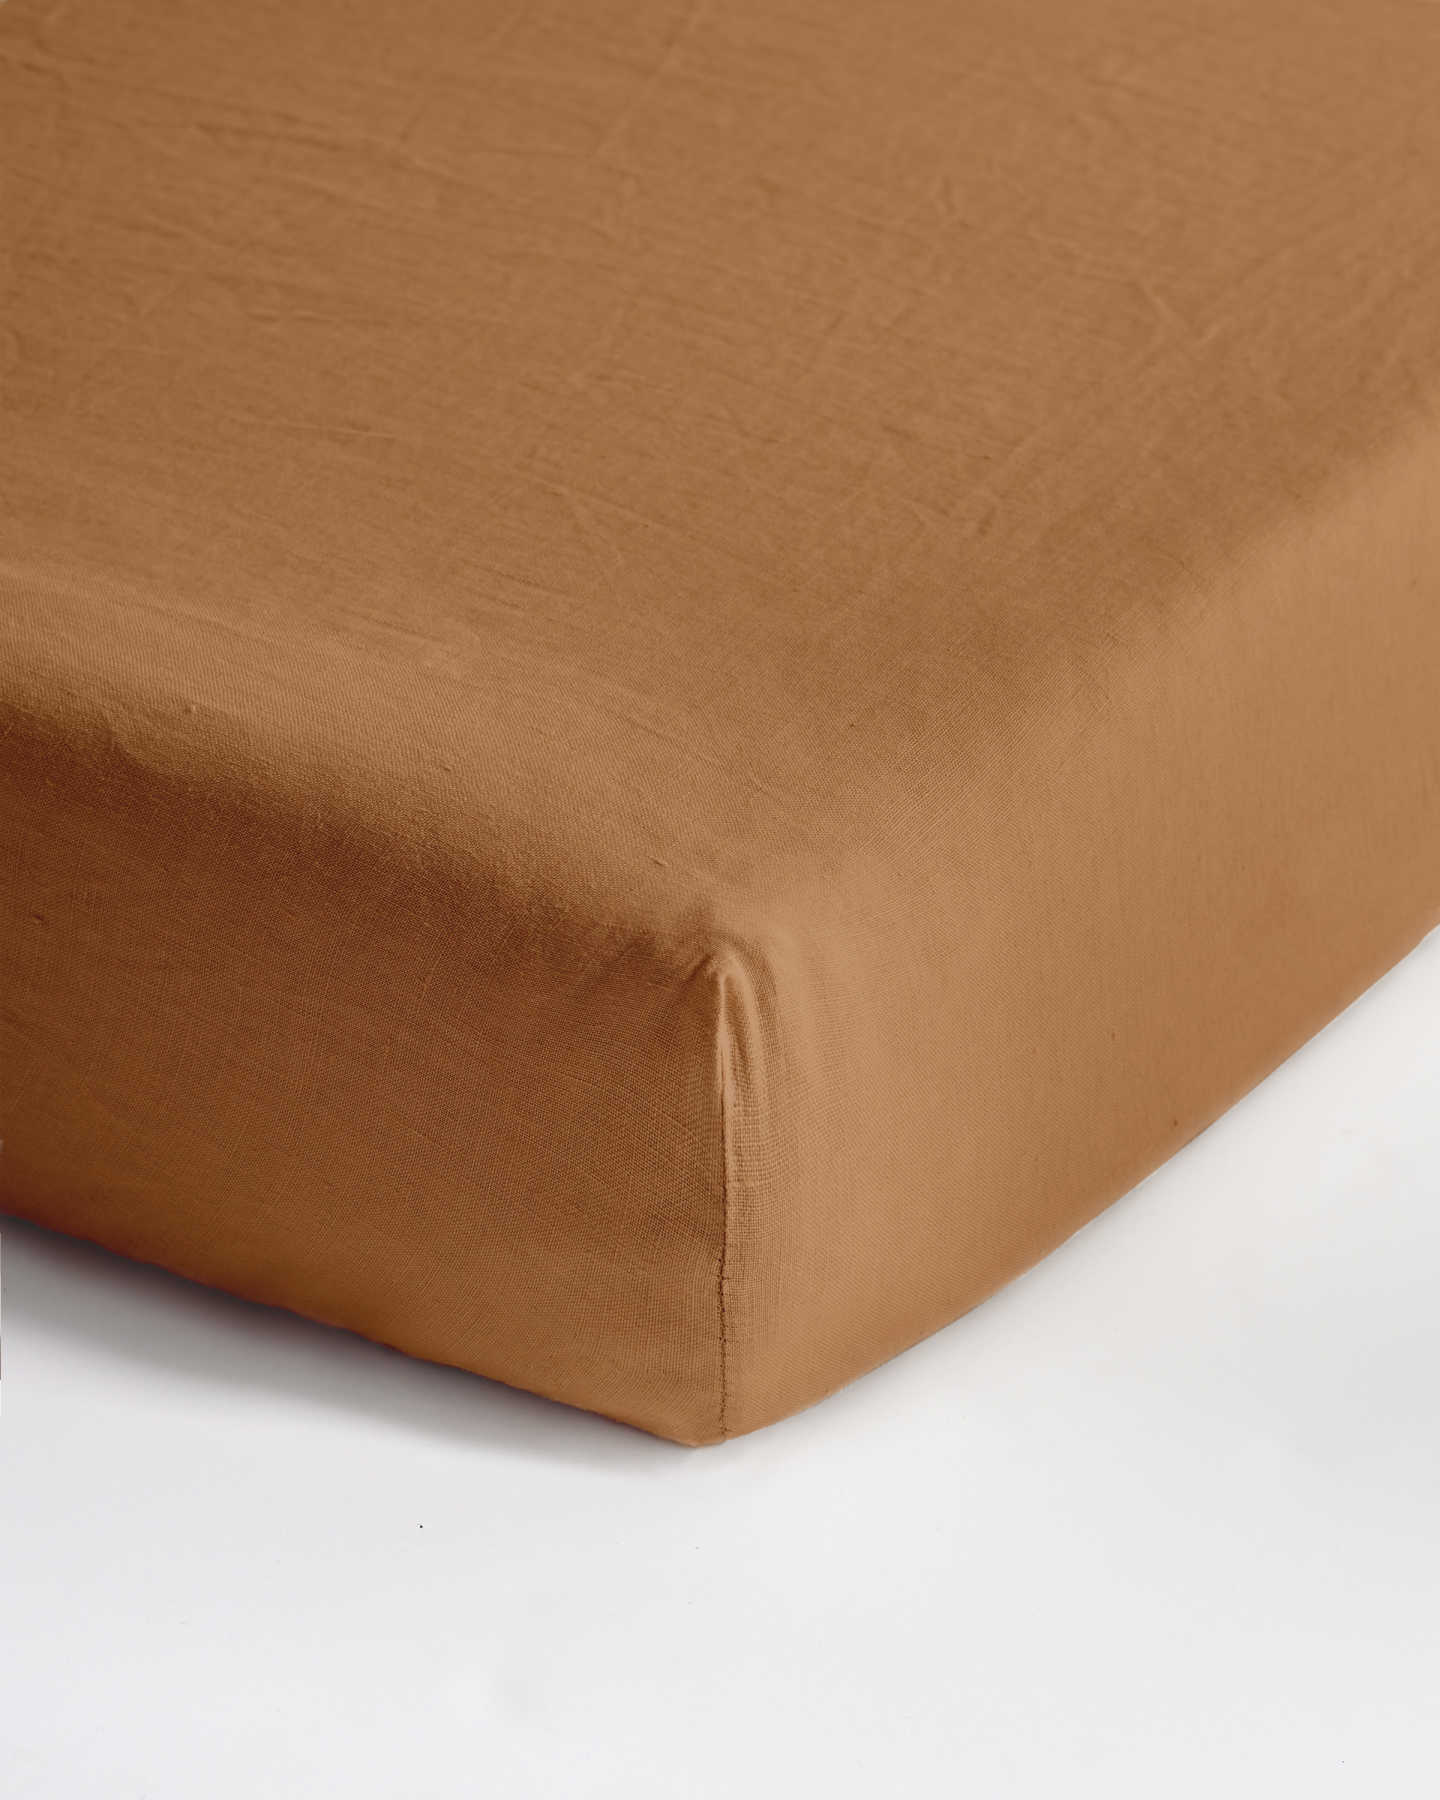 You May Also Like - Linen Fitted Crib Sheet Set - Terracotta